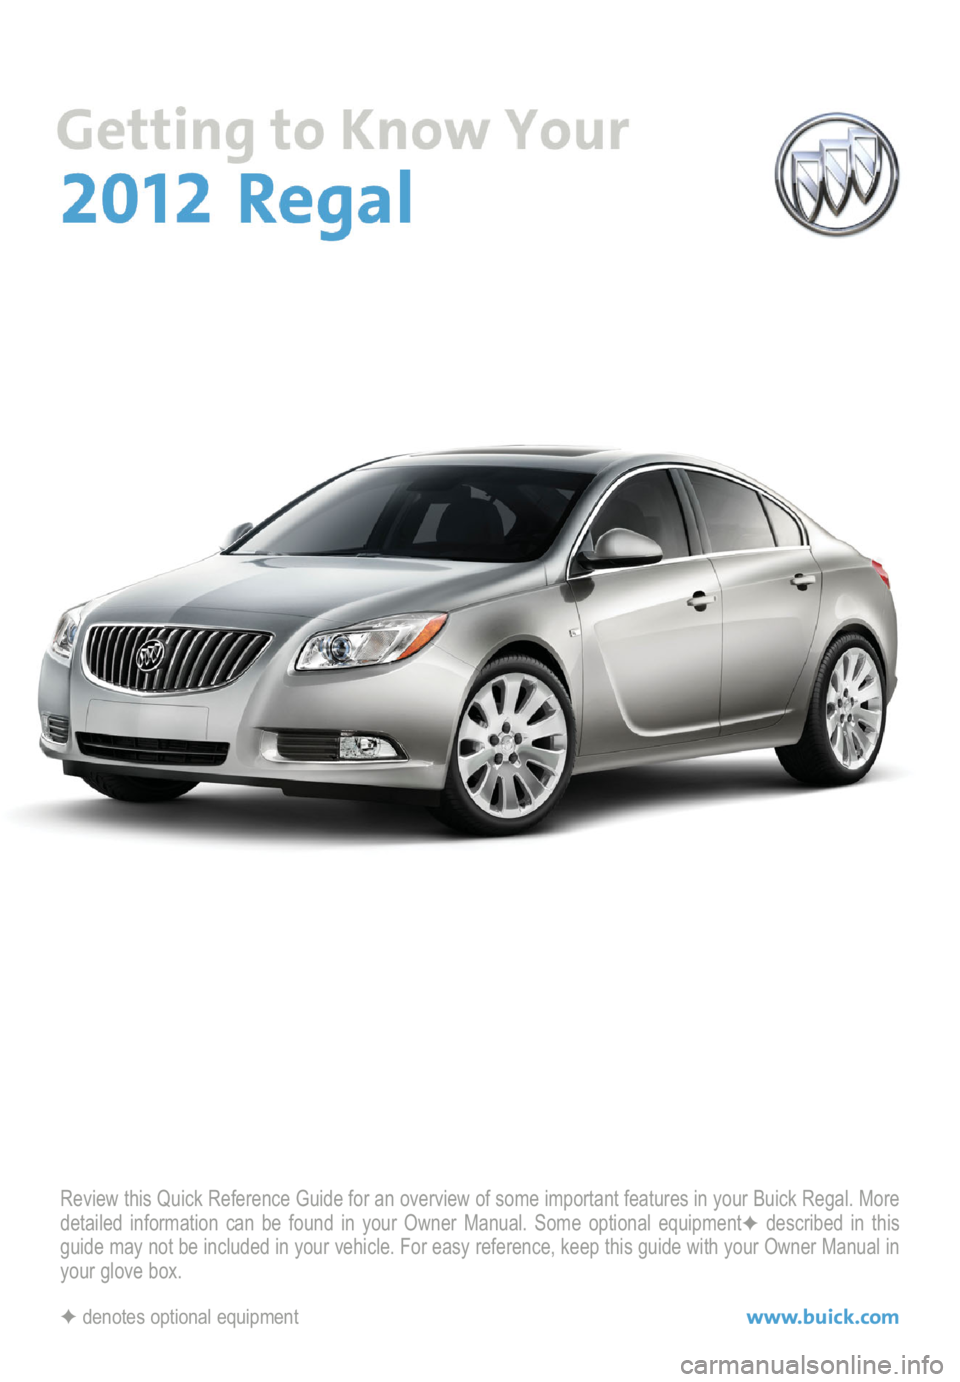 BUICK REGAL 2012  Get To Know Guide Review this Quick Reference Guide for an overview of some important features in your Buick Regal. More
detailed information can be found in your Owner Manual. Some optional equipment✦described in th